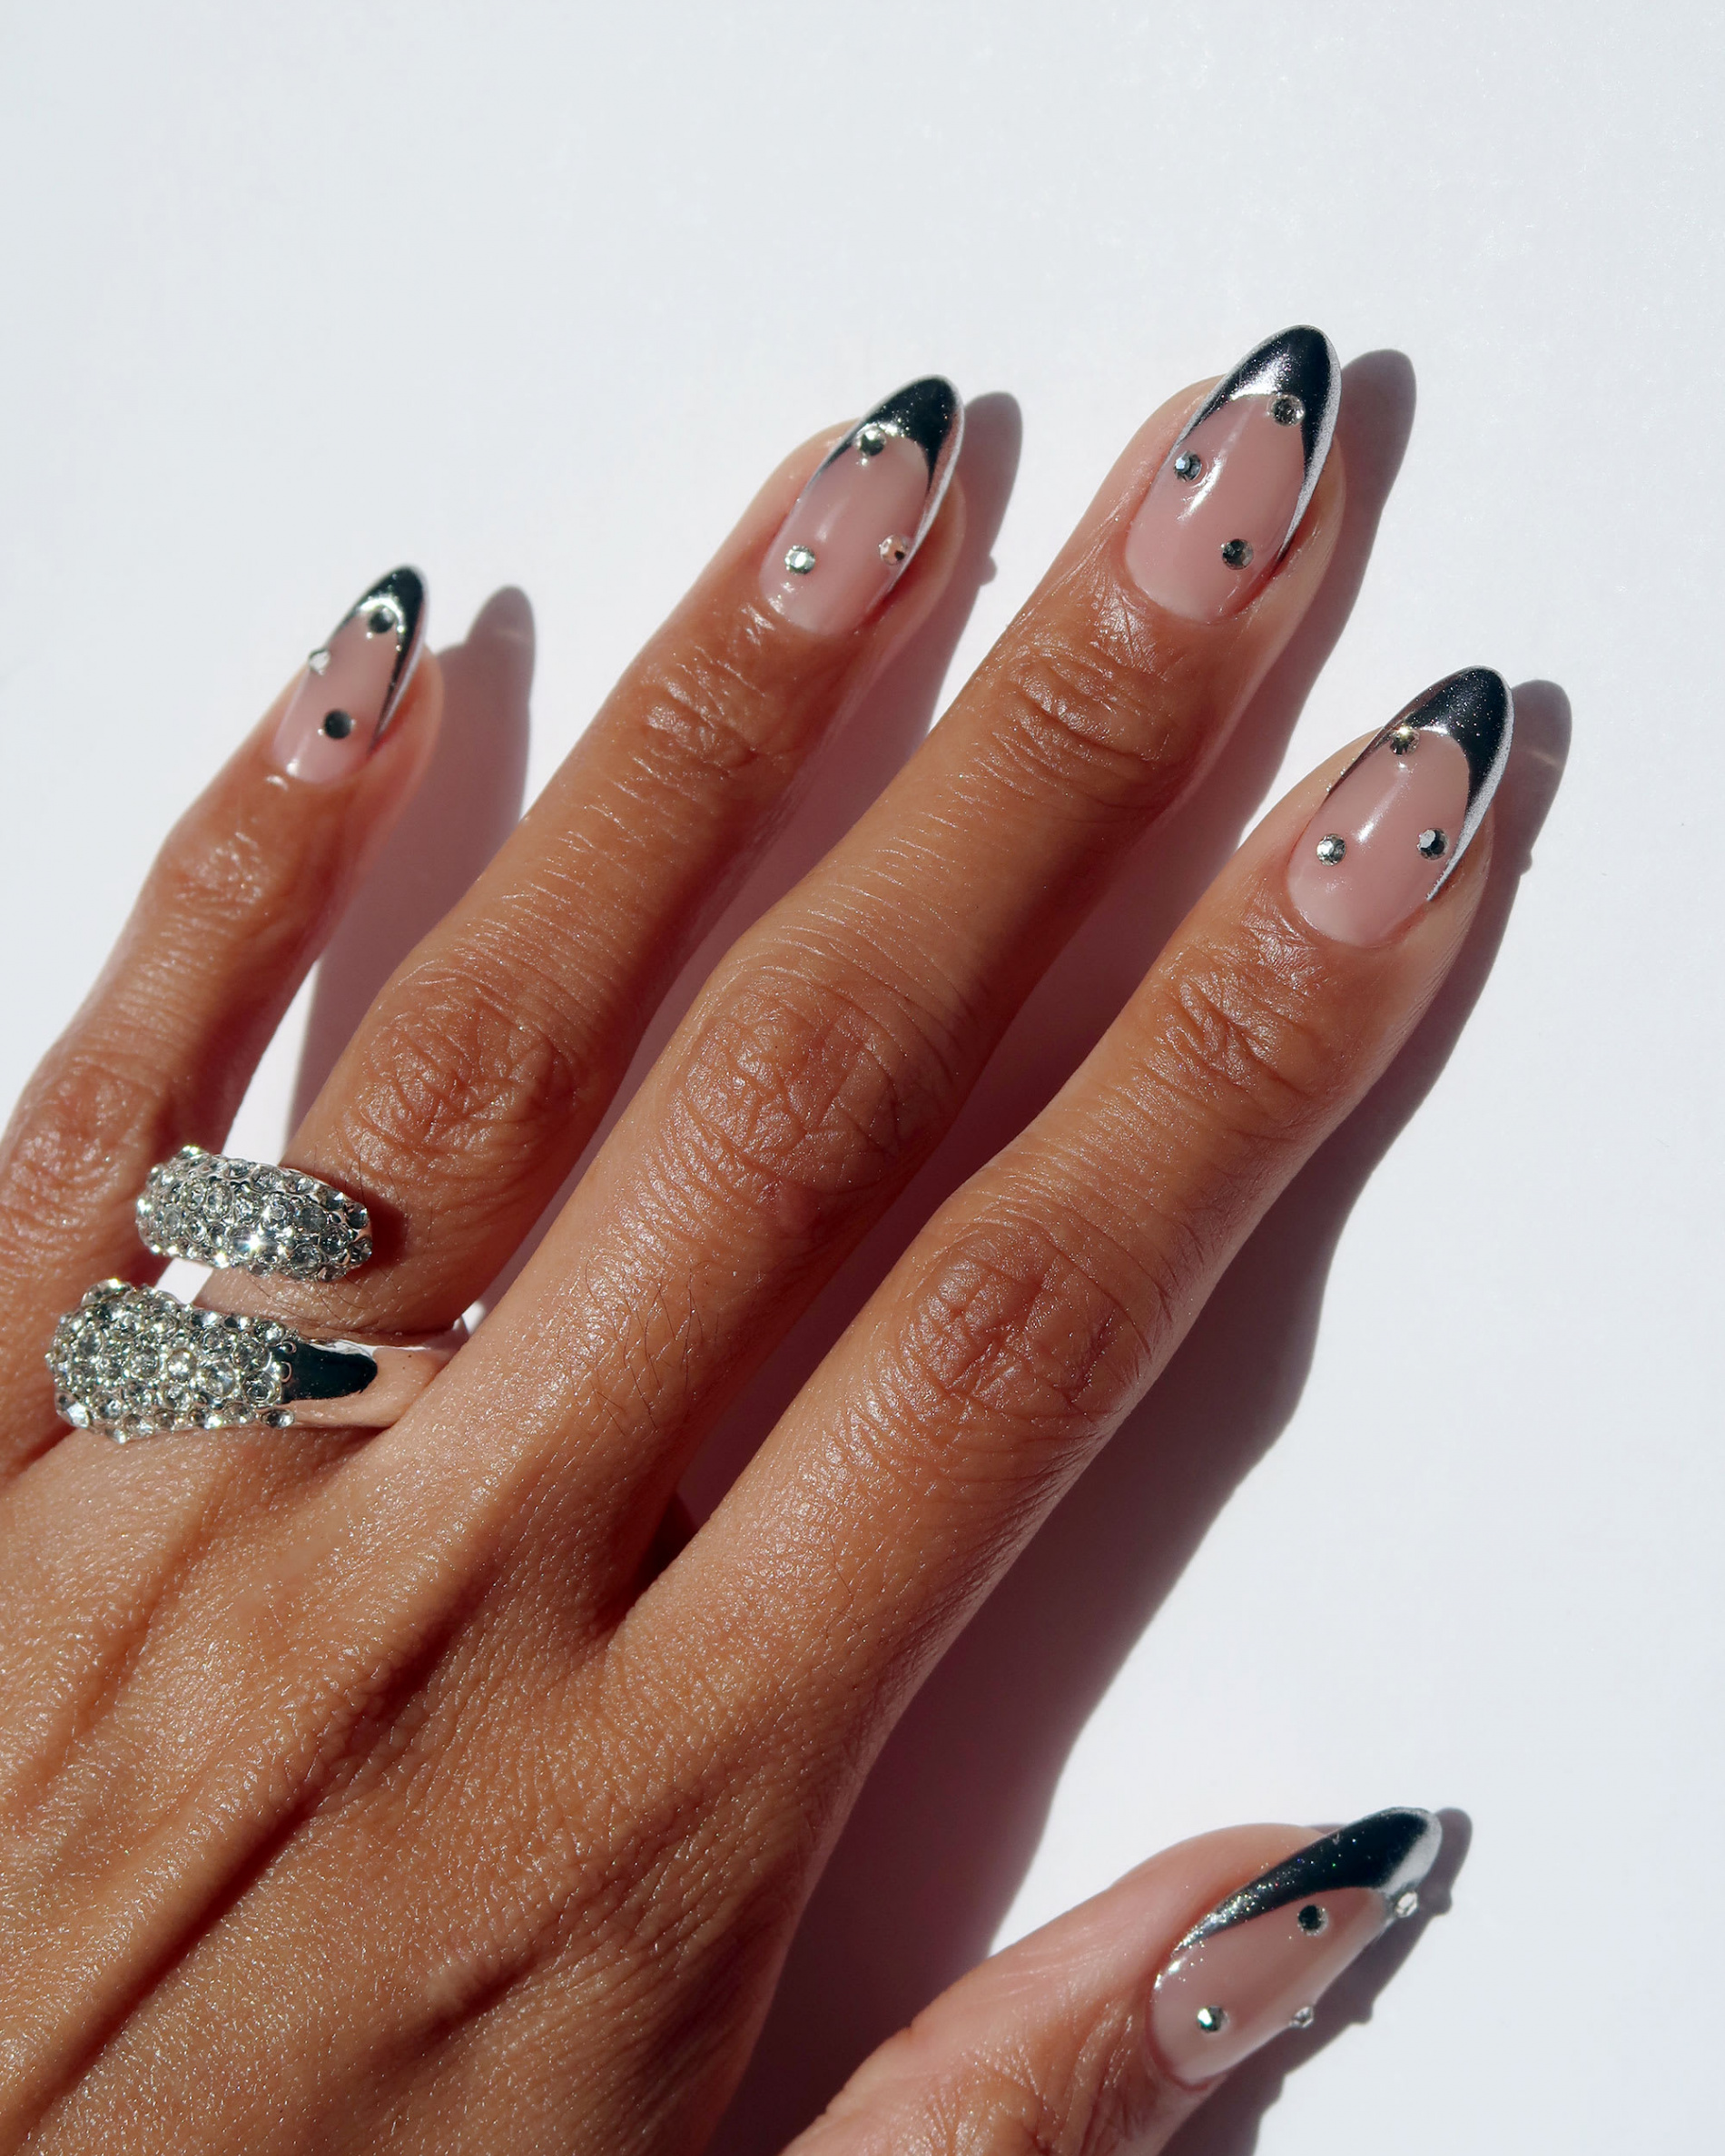 Get Holiday Glamour With Silver Chrome French Tip Nails - Lulus